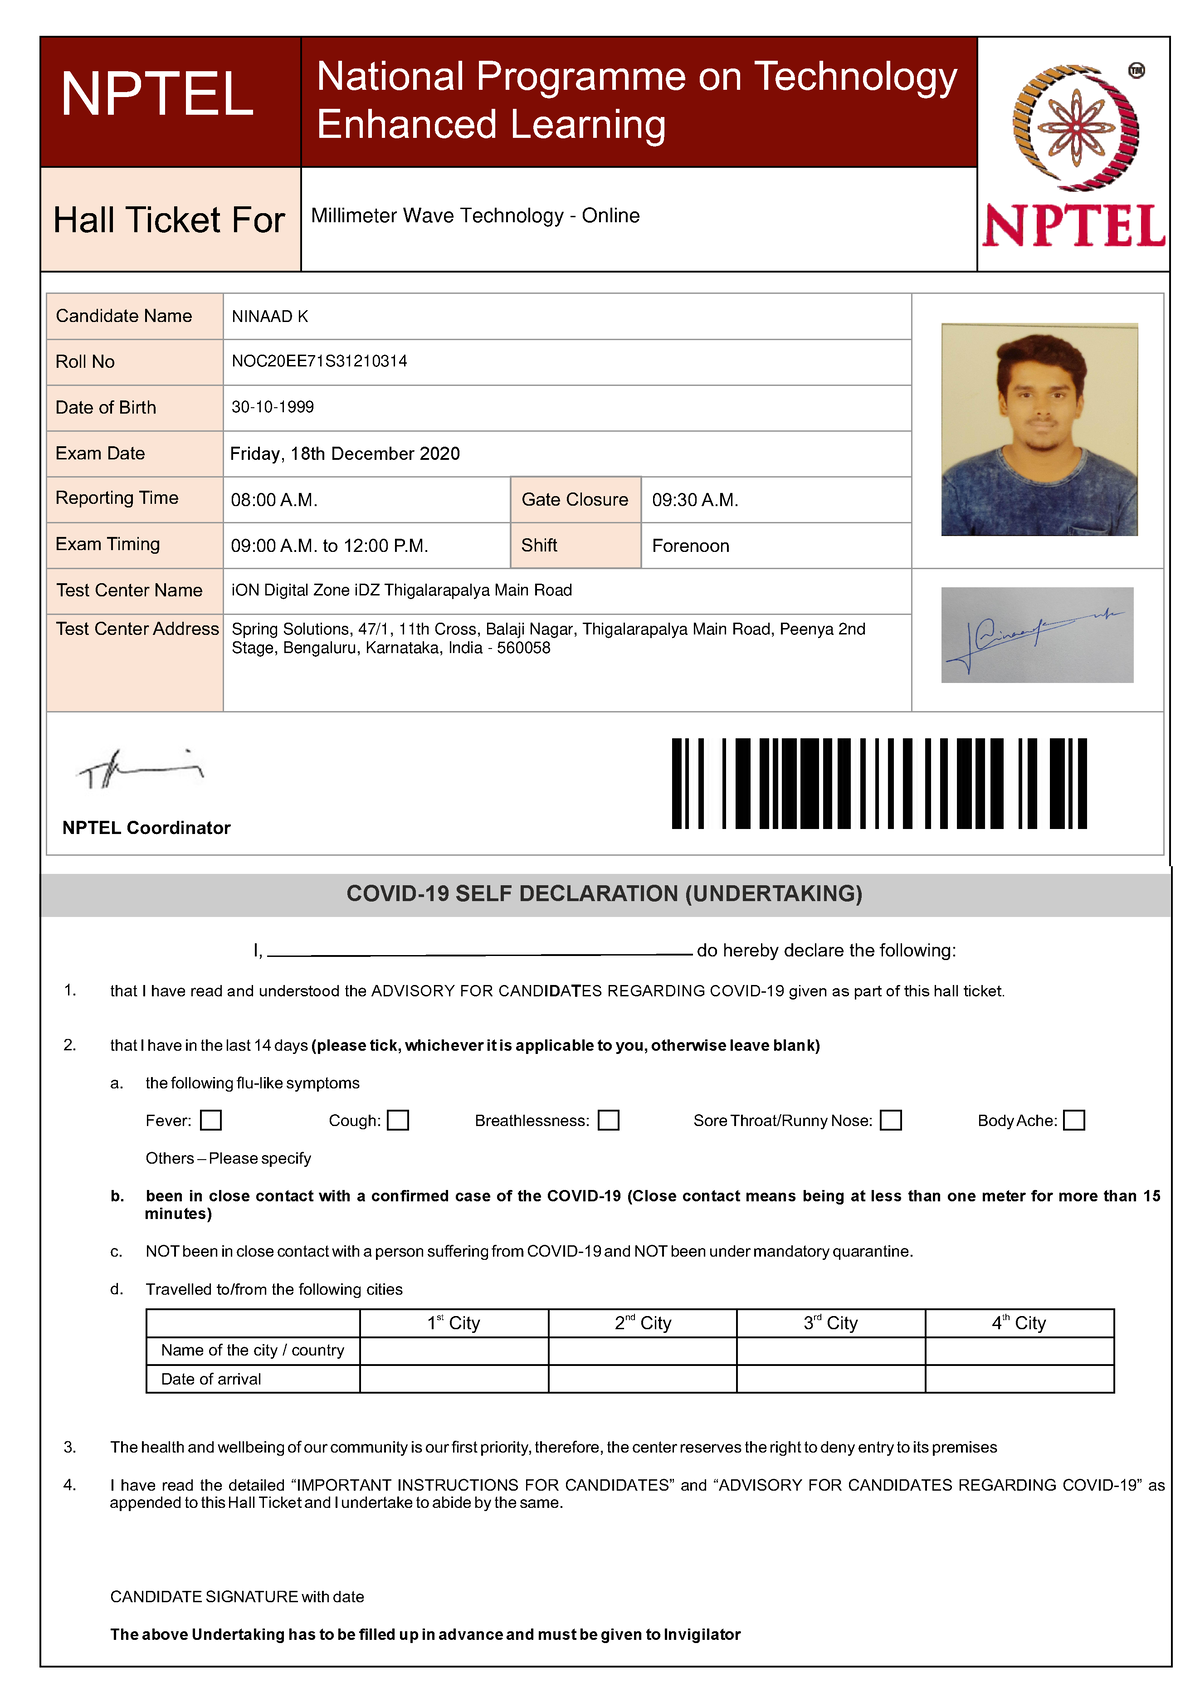 Millimeter Wave Technology - E-ADMIT CARD INSTRUCTIONS FOR THE EXAM ...